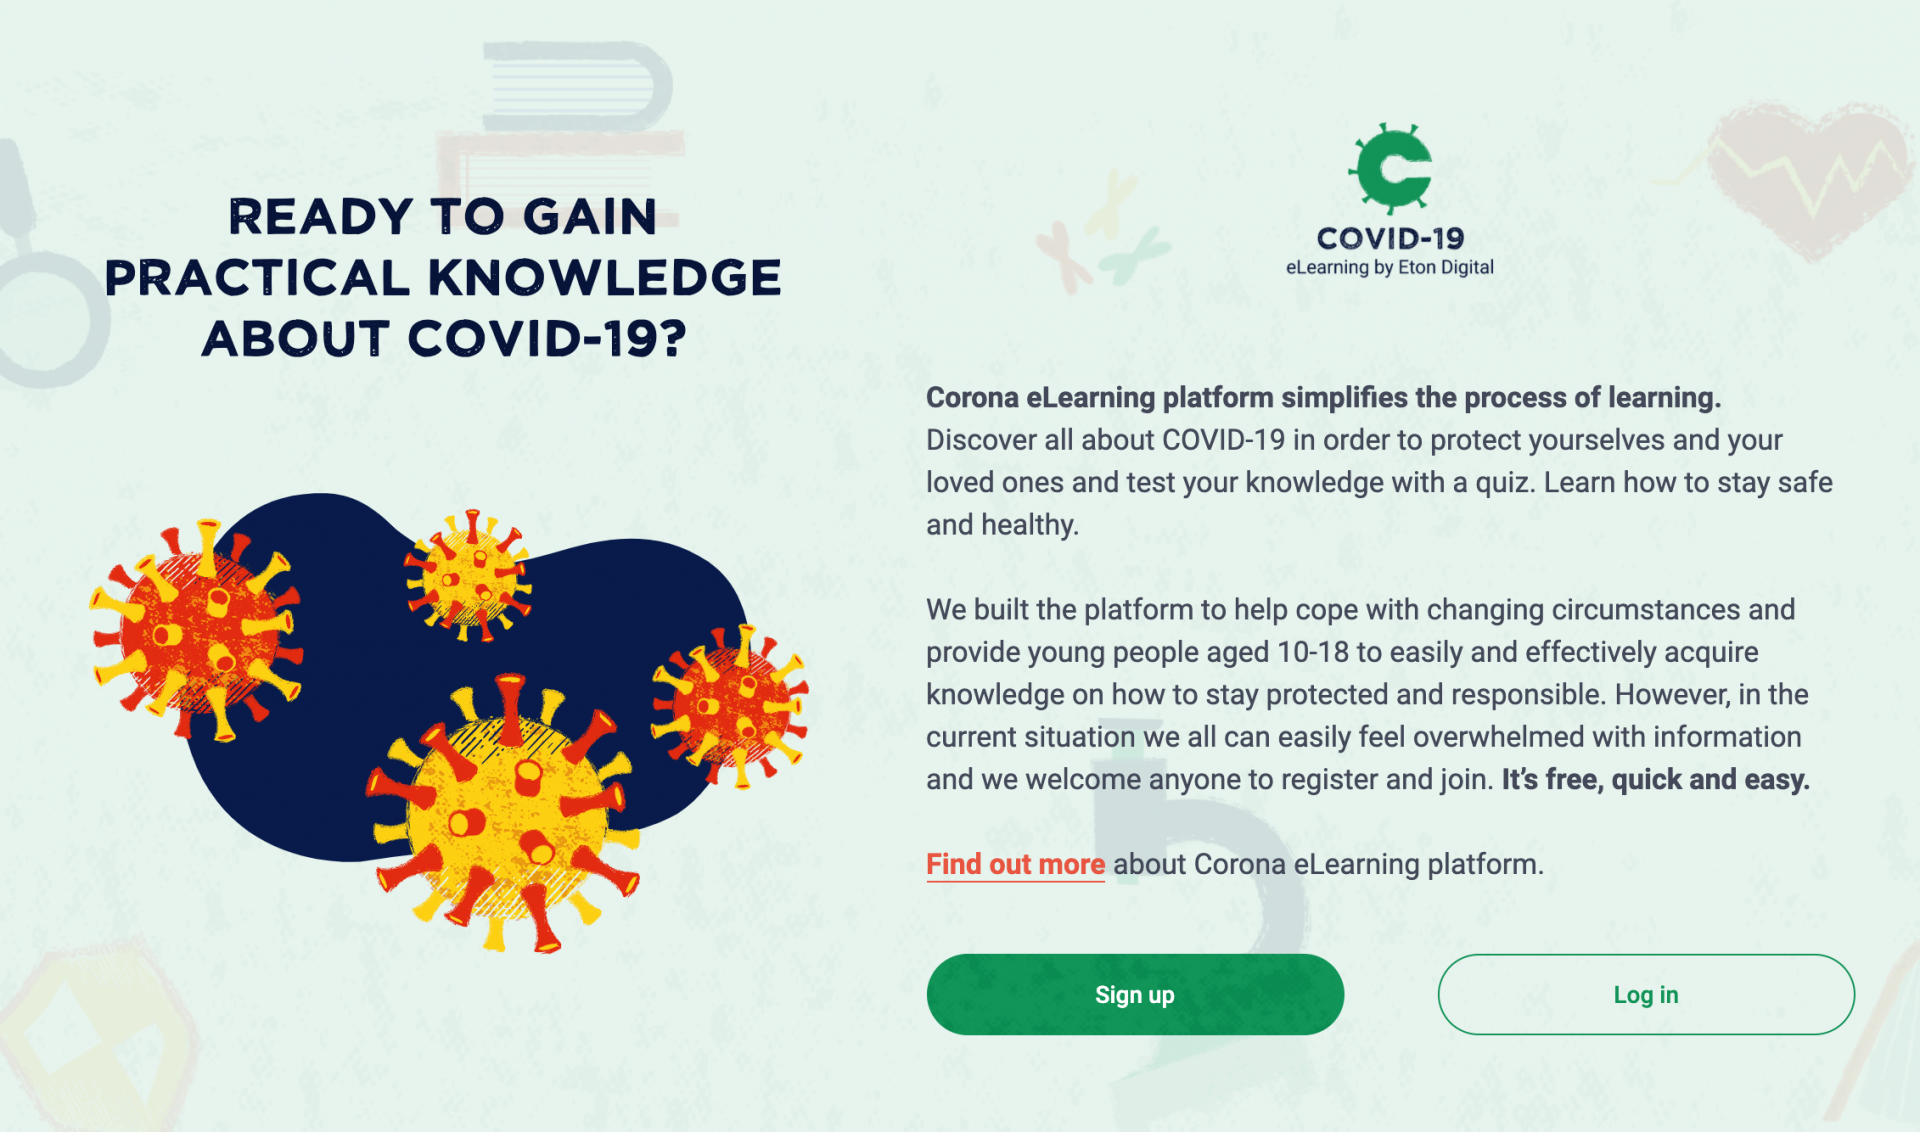 eLearning platform about COVID-19